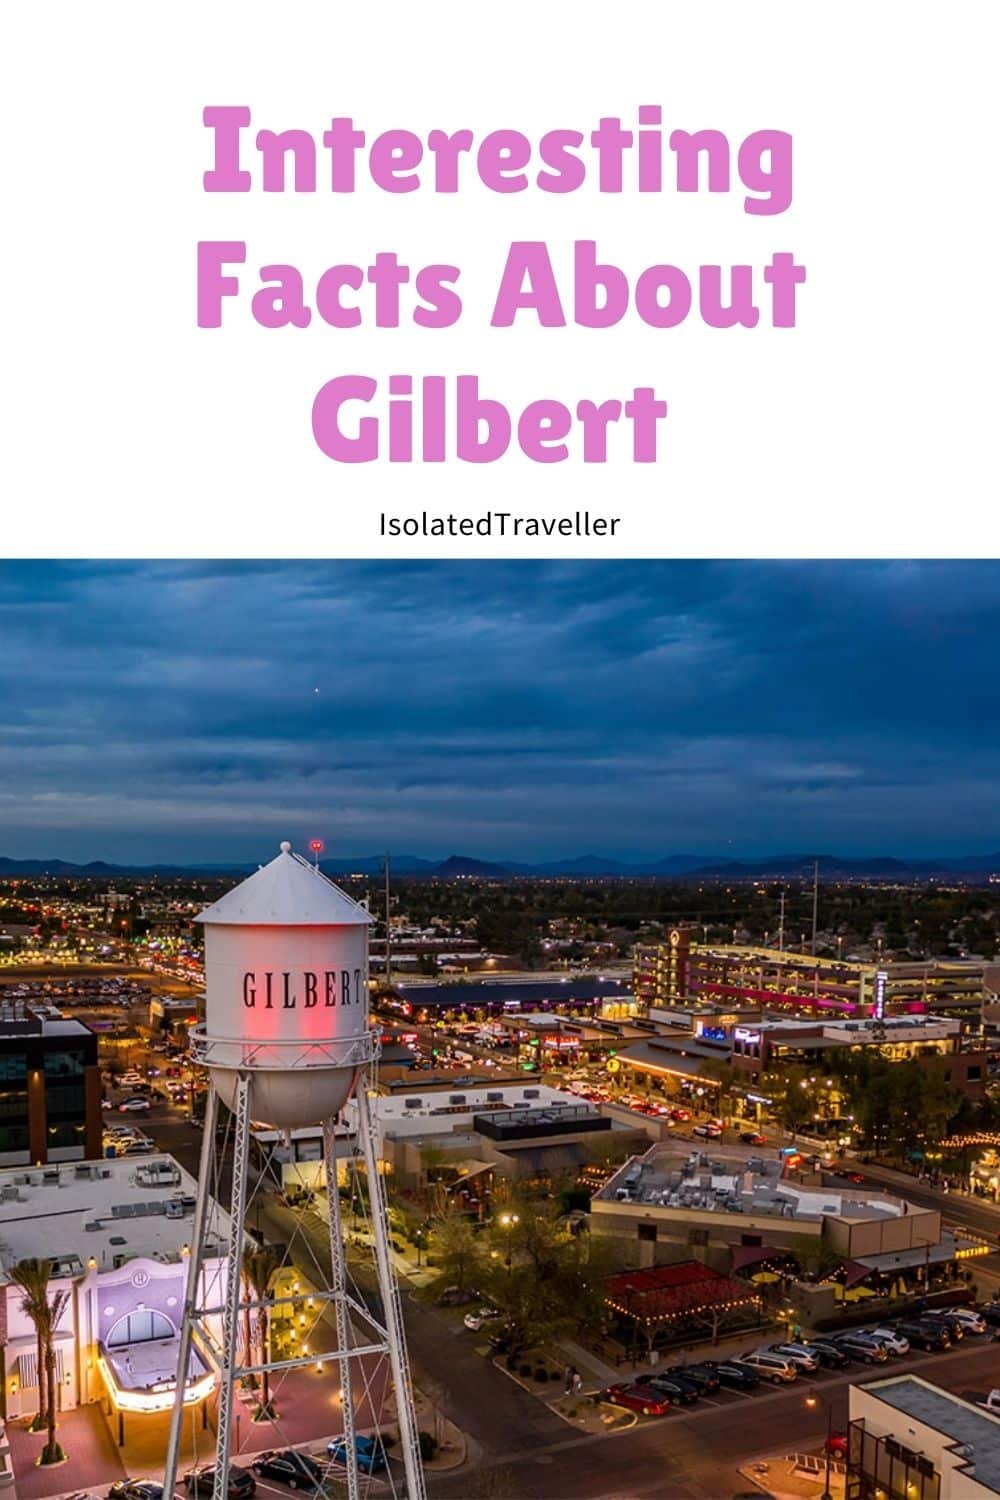 Facts About Gilbert